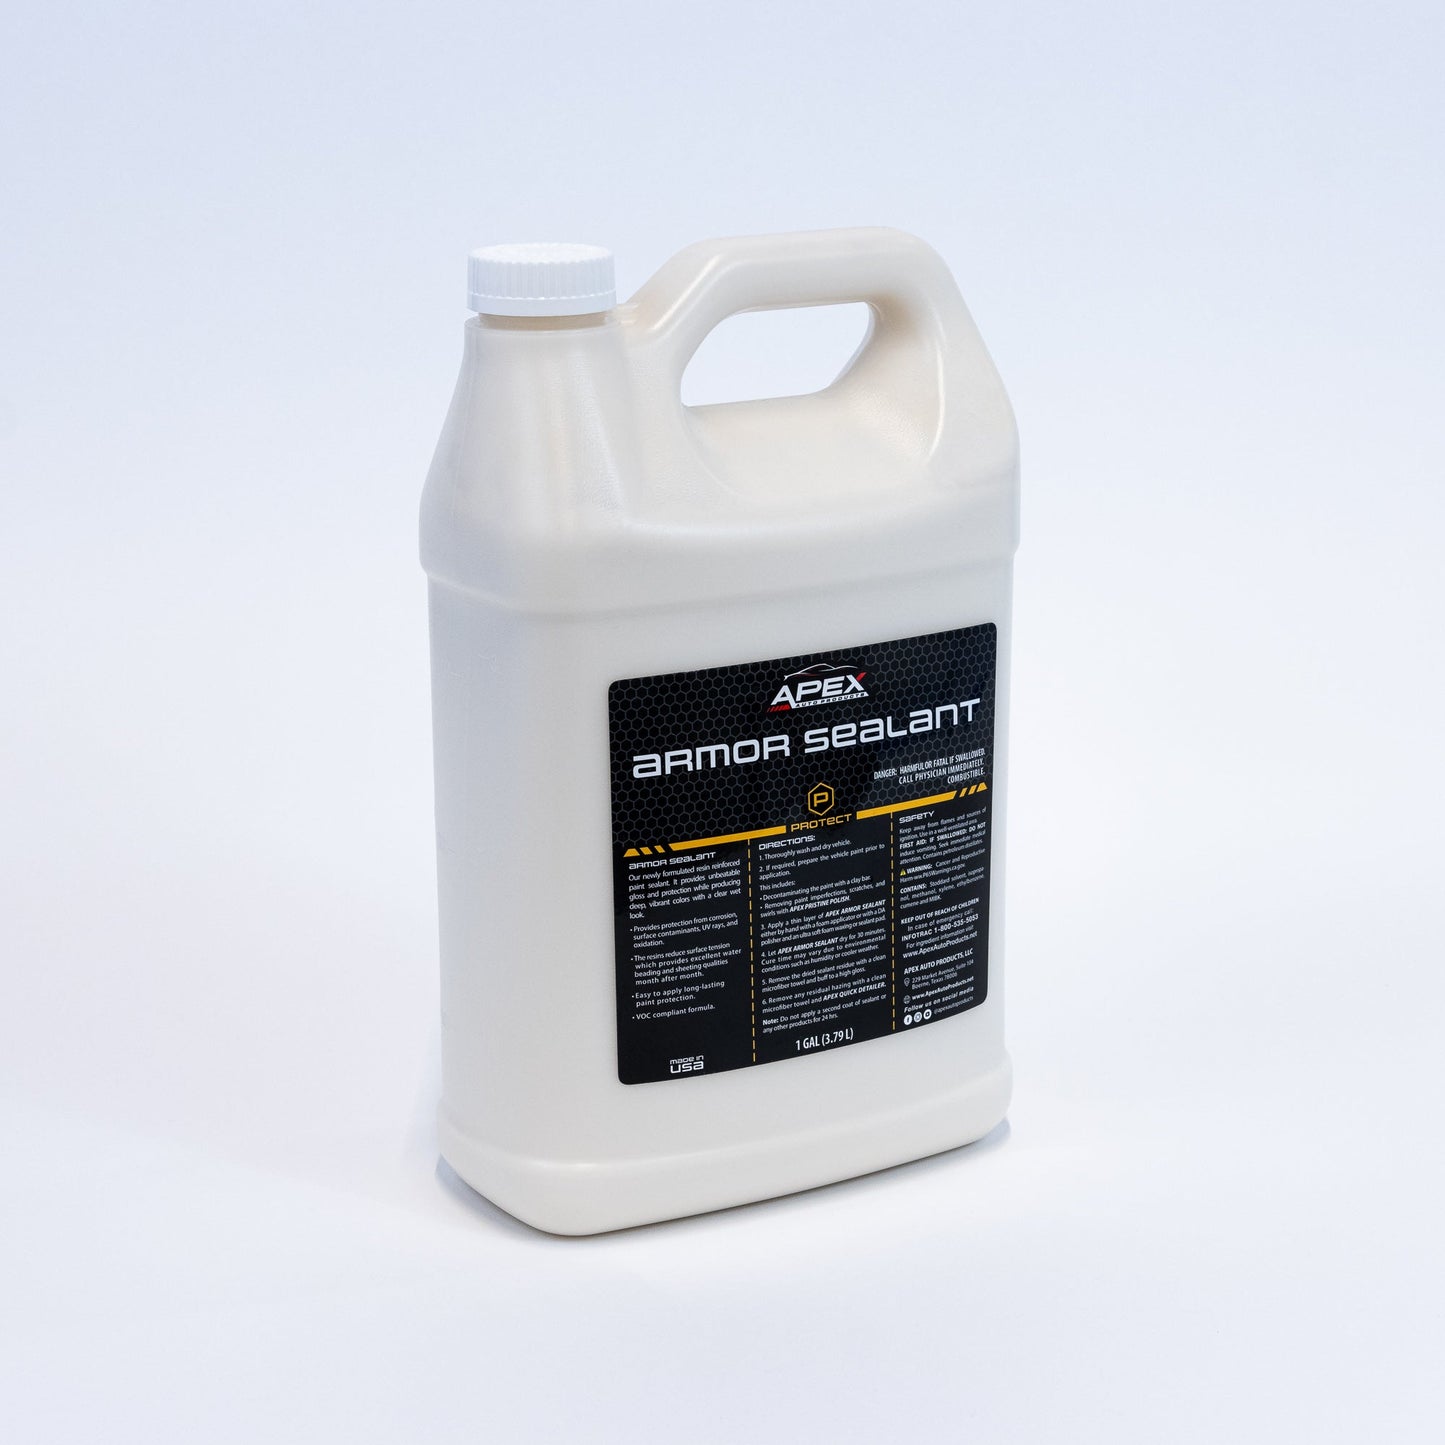 Armor Sealant (Resin-reinforced) - APEX Auto Products